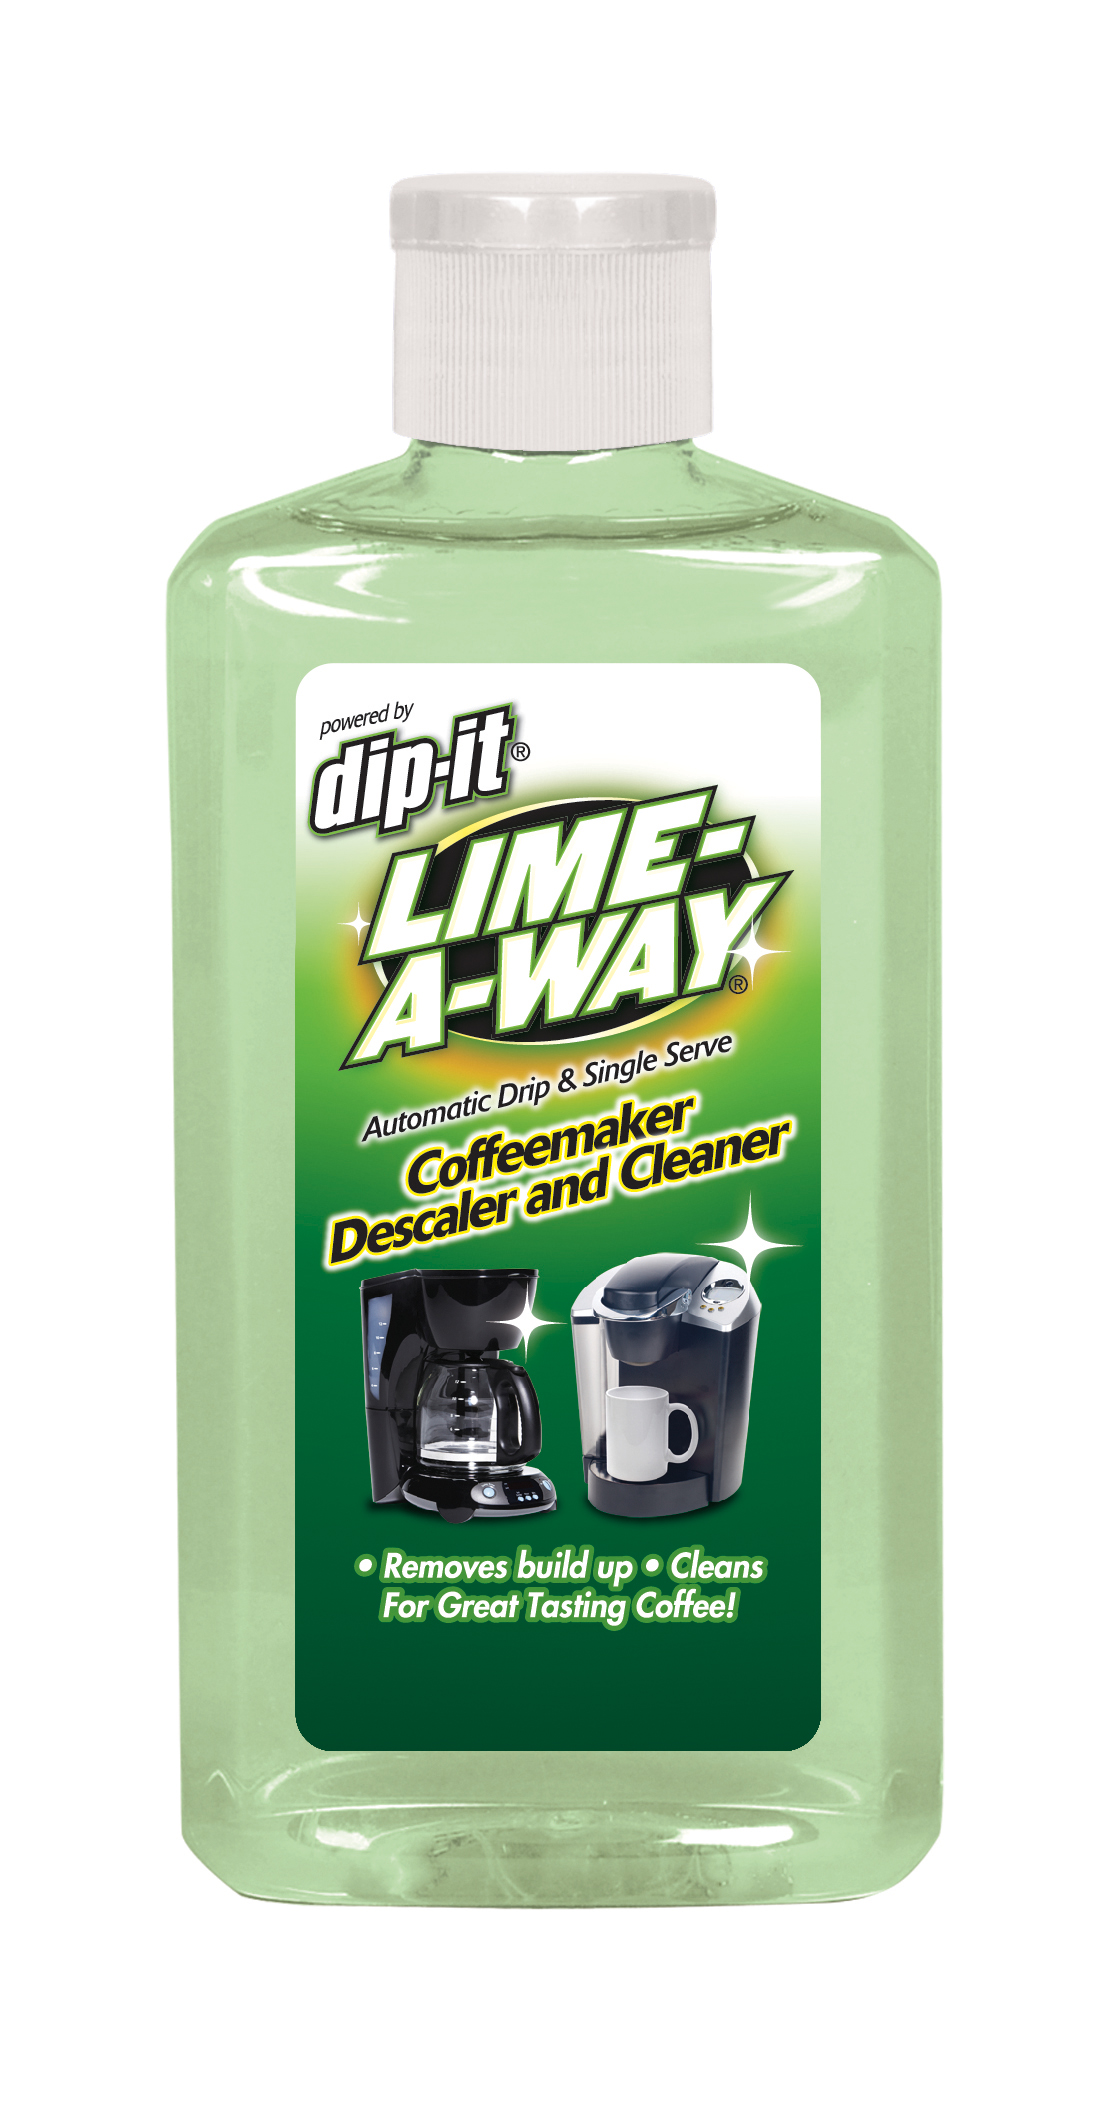 LIMEAWAY DipIt Coffeemaker Descaler and Cleaner